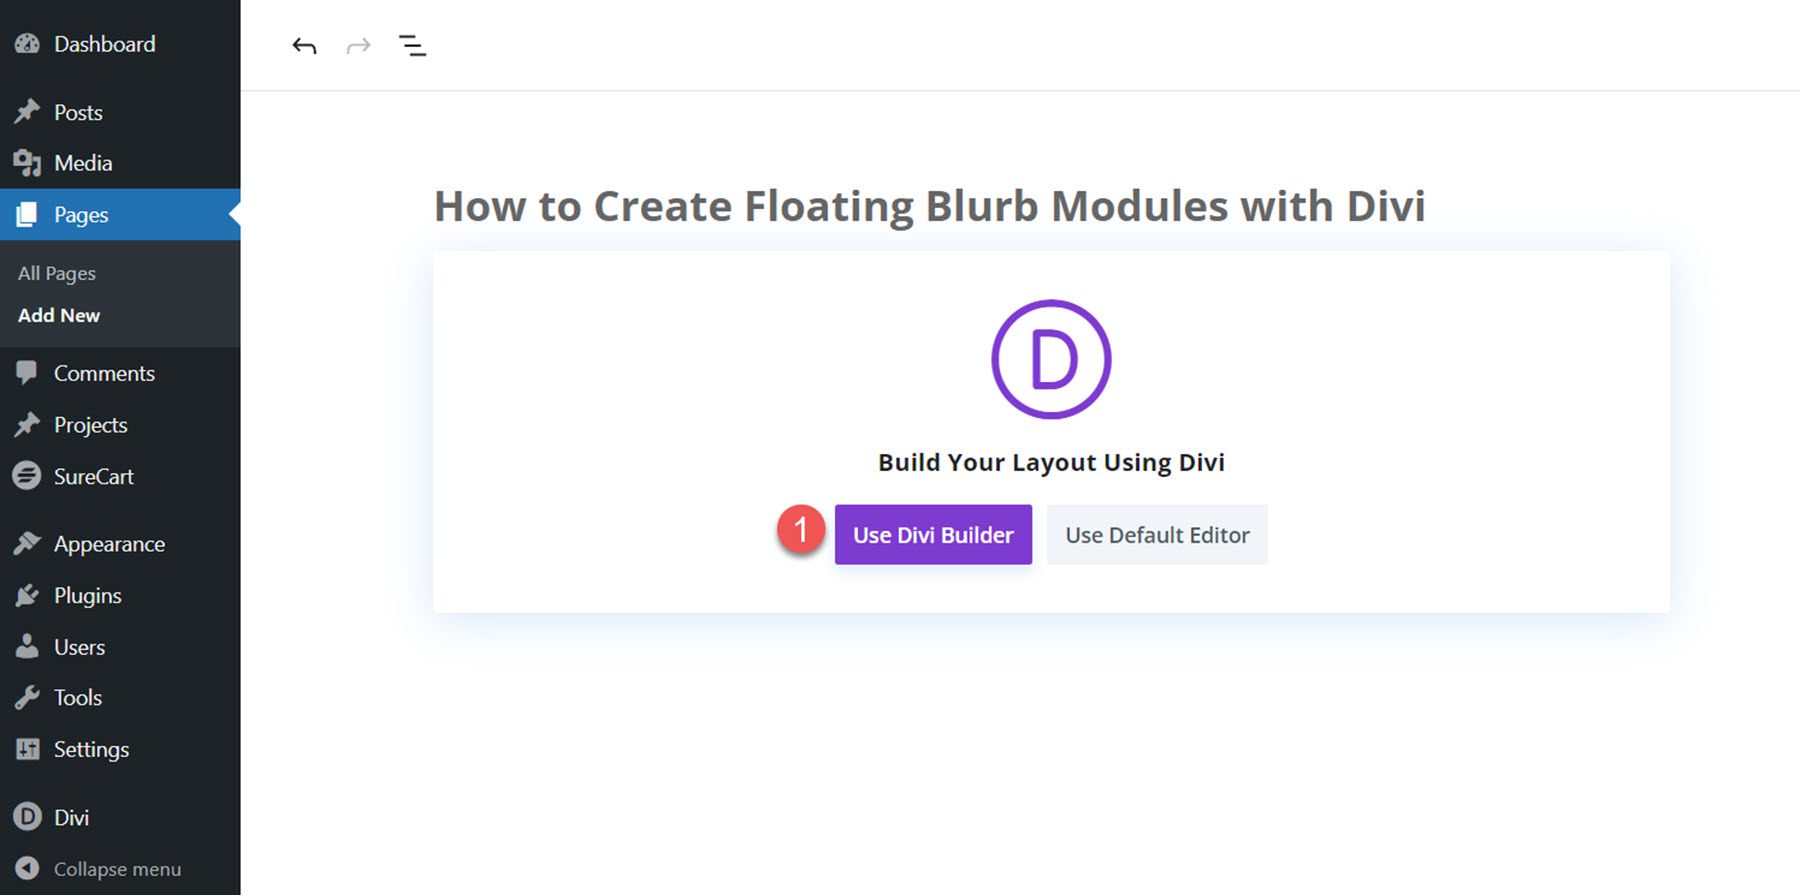 How to Create Floating Blurb Modules with Divi Use Divi Builder